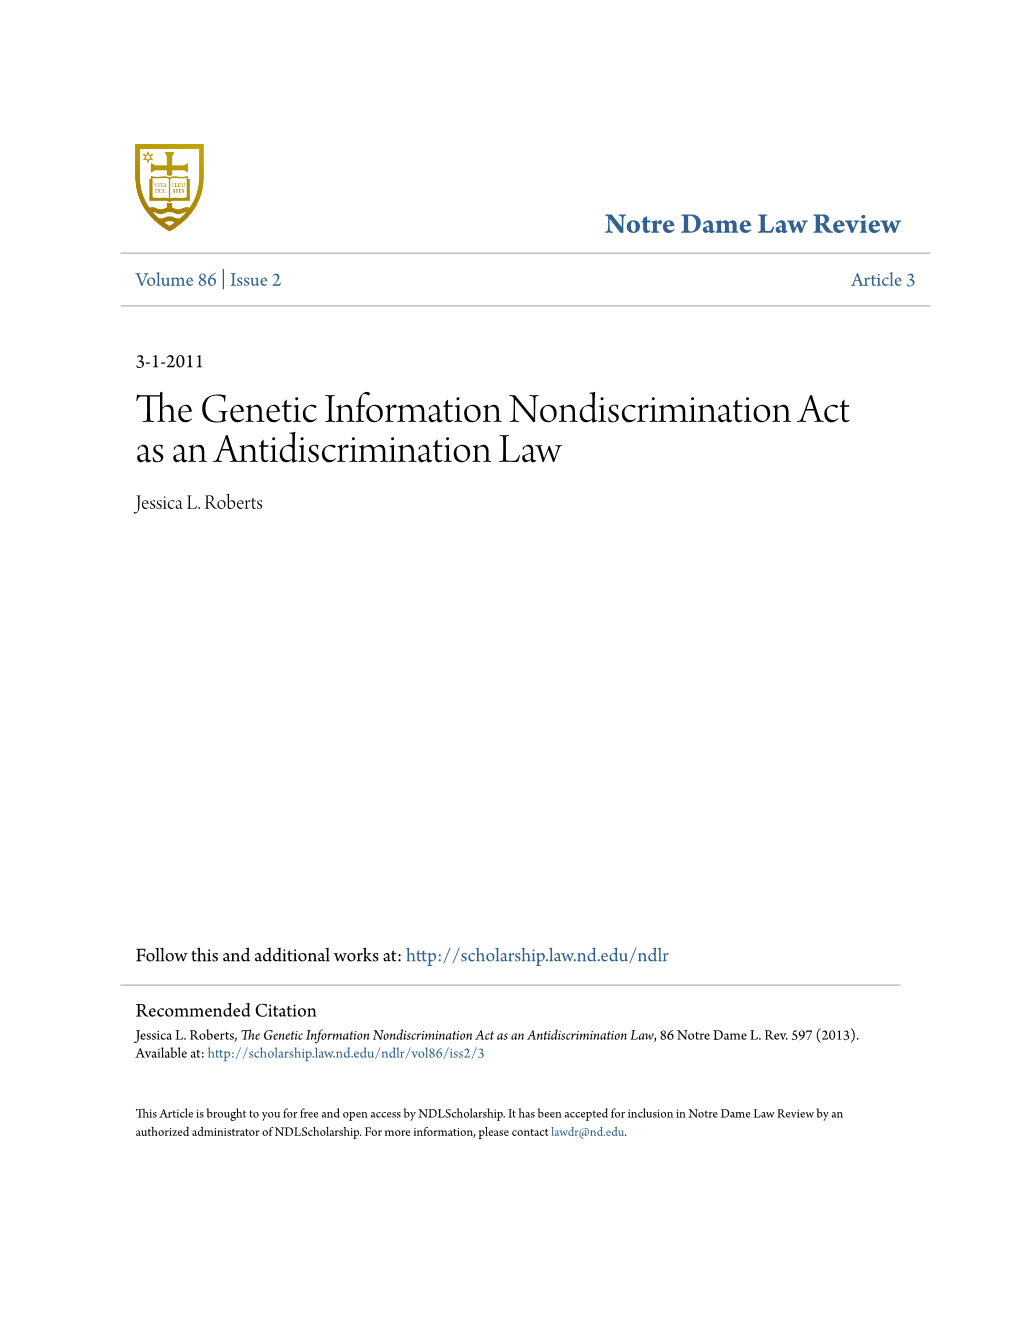 The Genetic Information Nondiscrimination Act As an Antidiscrimination Law Jessica L